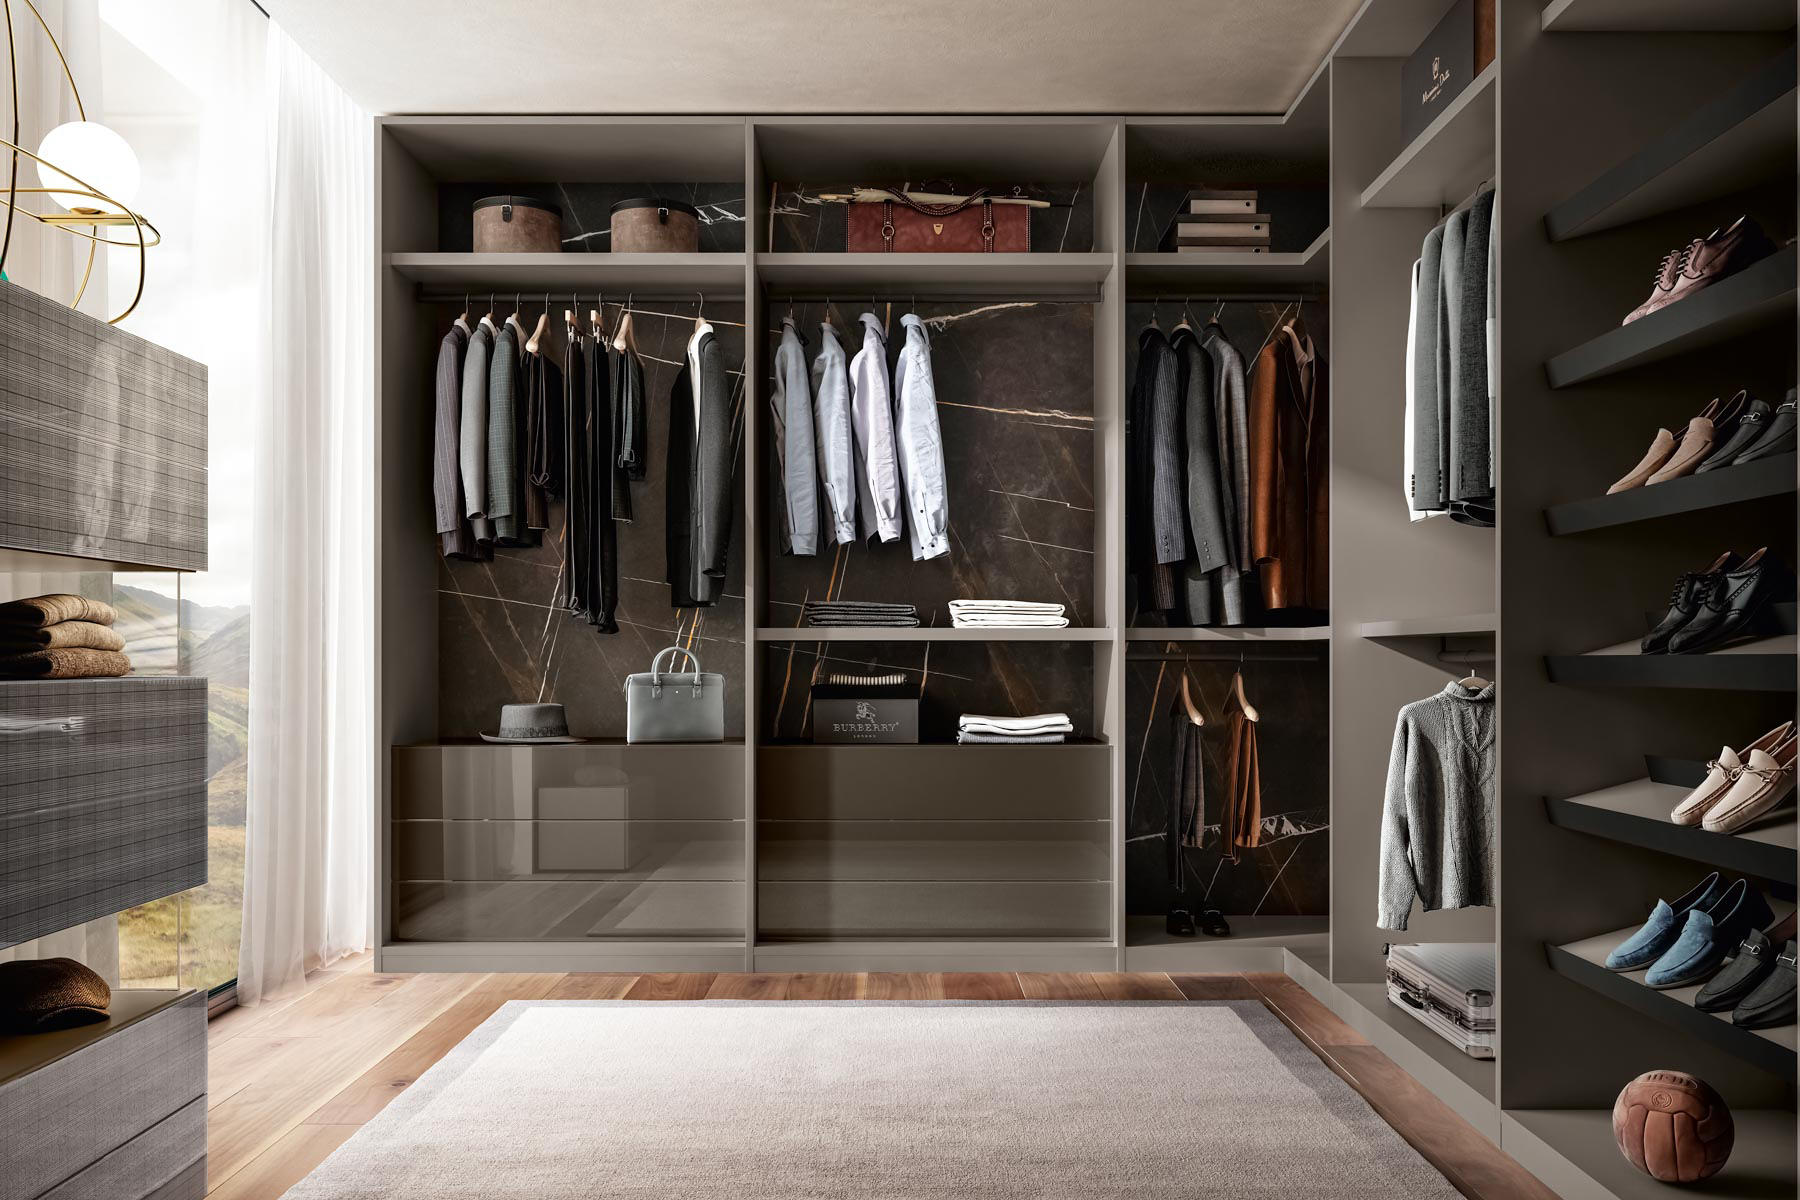 Outfit Walk-in Closet - 1182 | Architonic